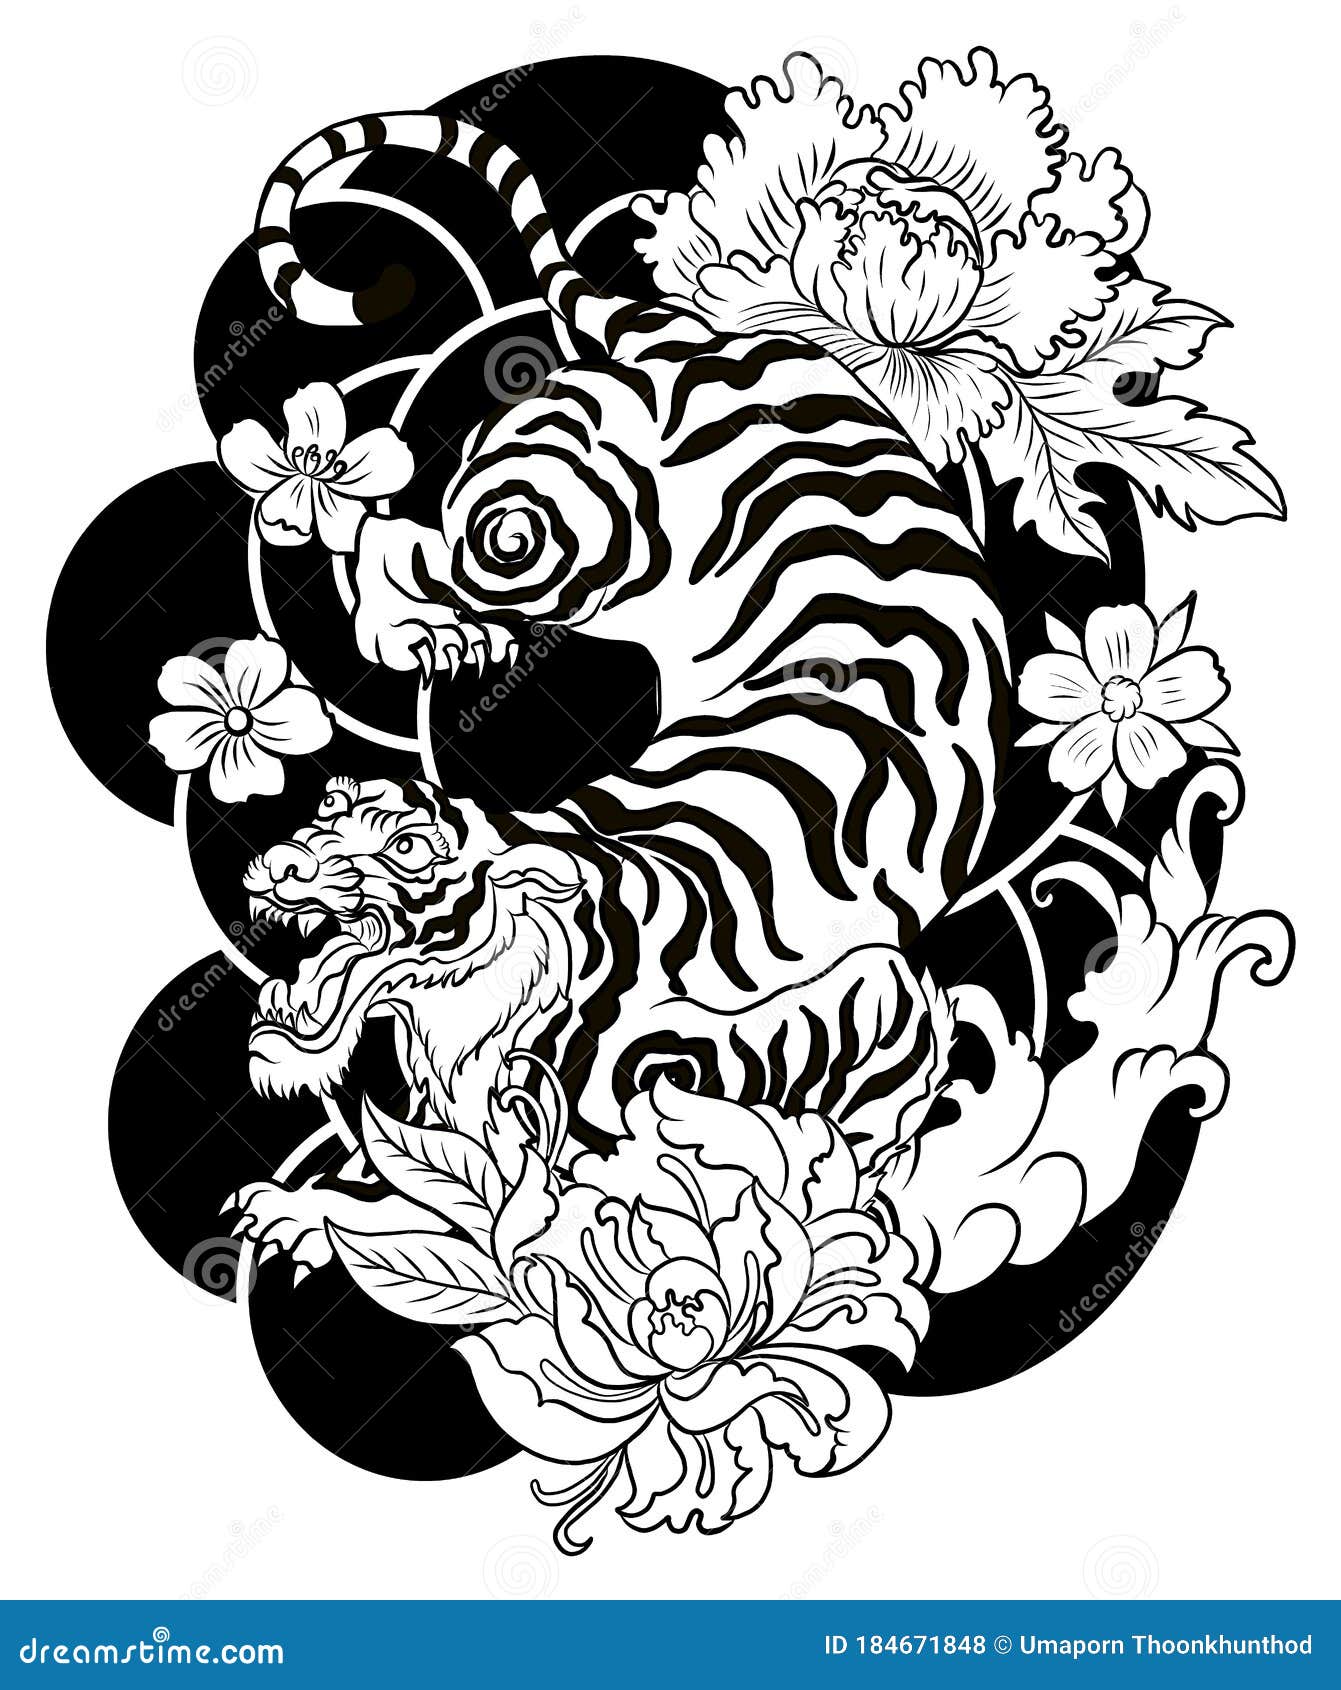 Premium Vector  Illustration of tiger tattoo in black and white vector